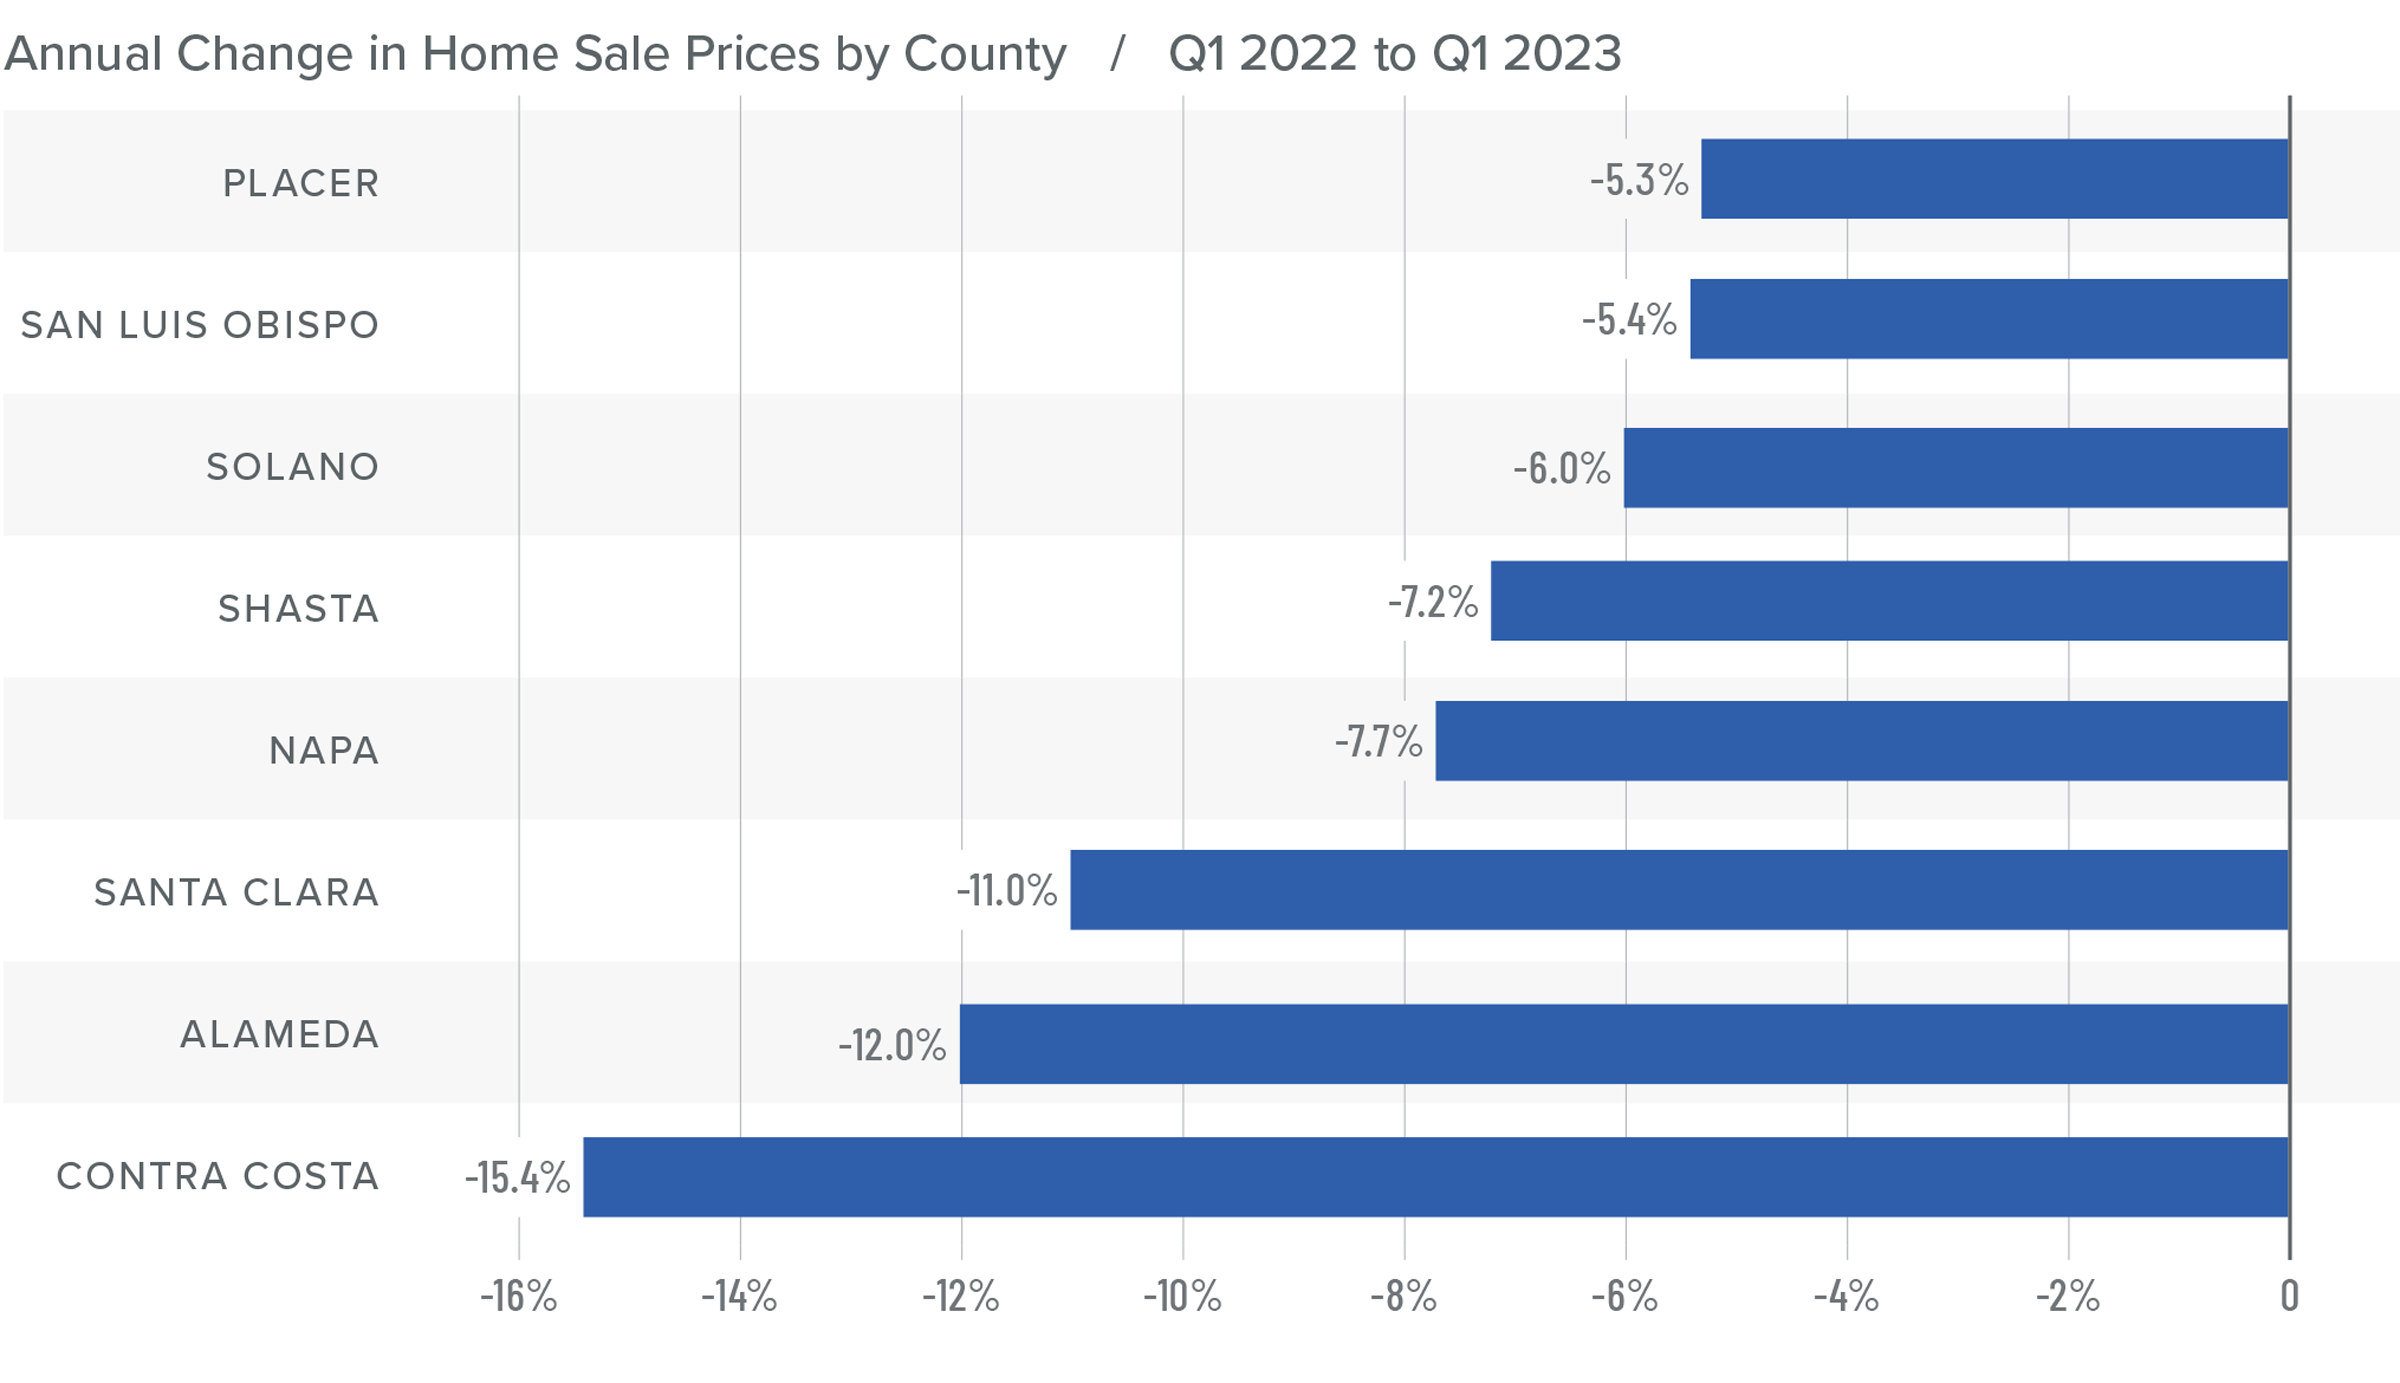 A bar graph showing the annual change in home sale prices for various counties in Northern California from Q1 2022 to Q1 2023. Placer is at -5.3%, San Luis Obispo -5.4%, Solano -6%, Shasta -7.2%, Napa -7.7%, Santa Clara -11%, Alameda -12%, and Contra Costa -15.4%.